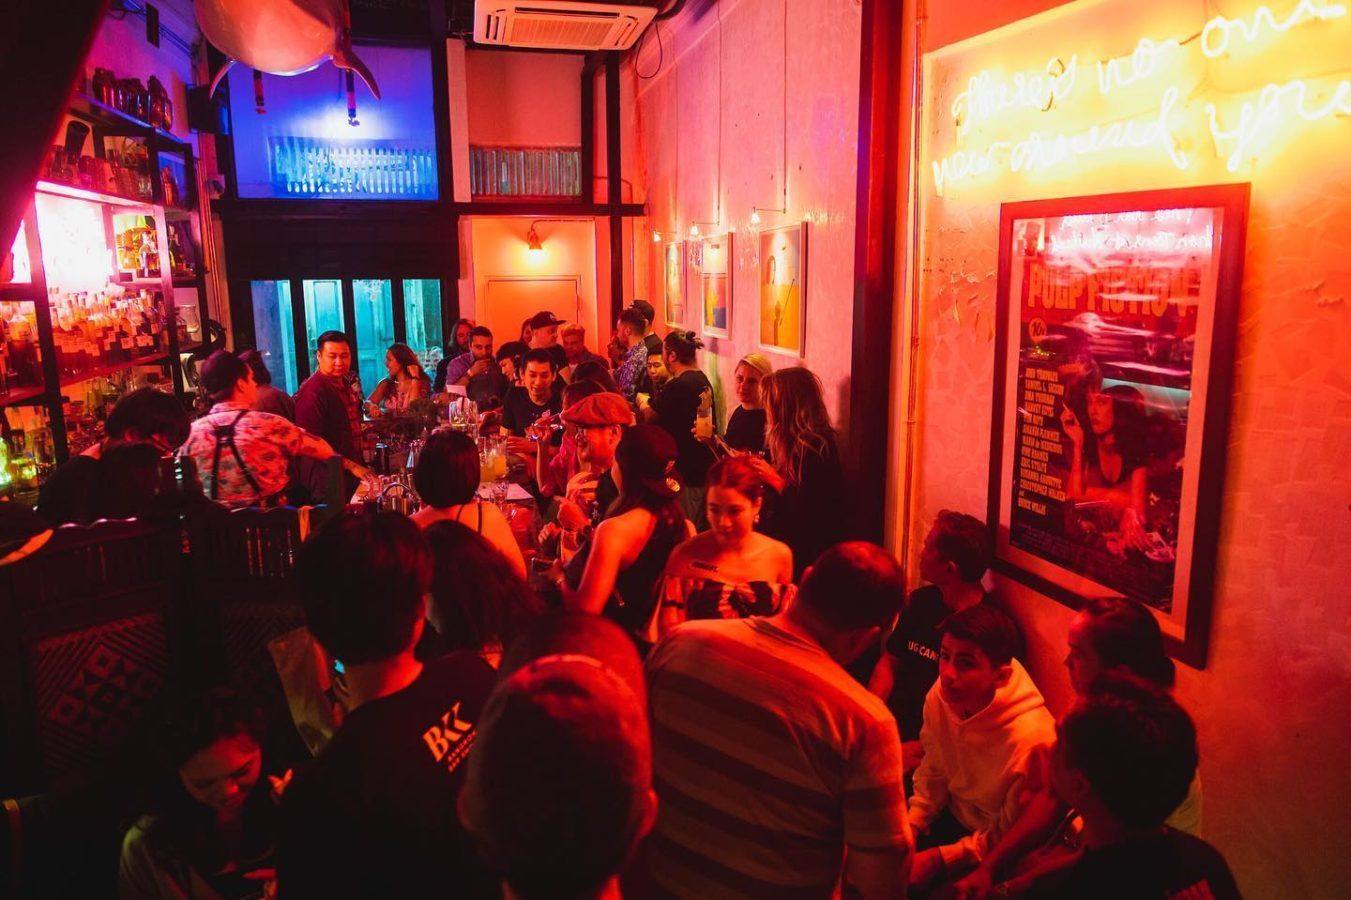 Over 55 bar and drinks events to bookmark in Bangkok from 25-30 April 2022